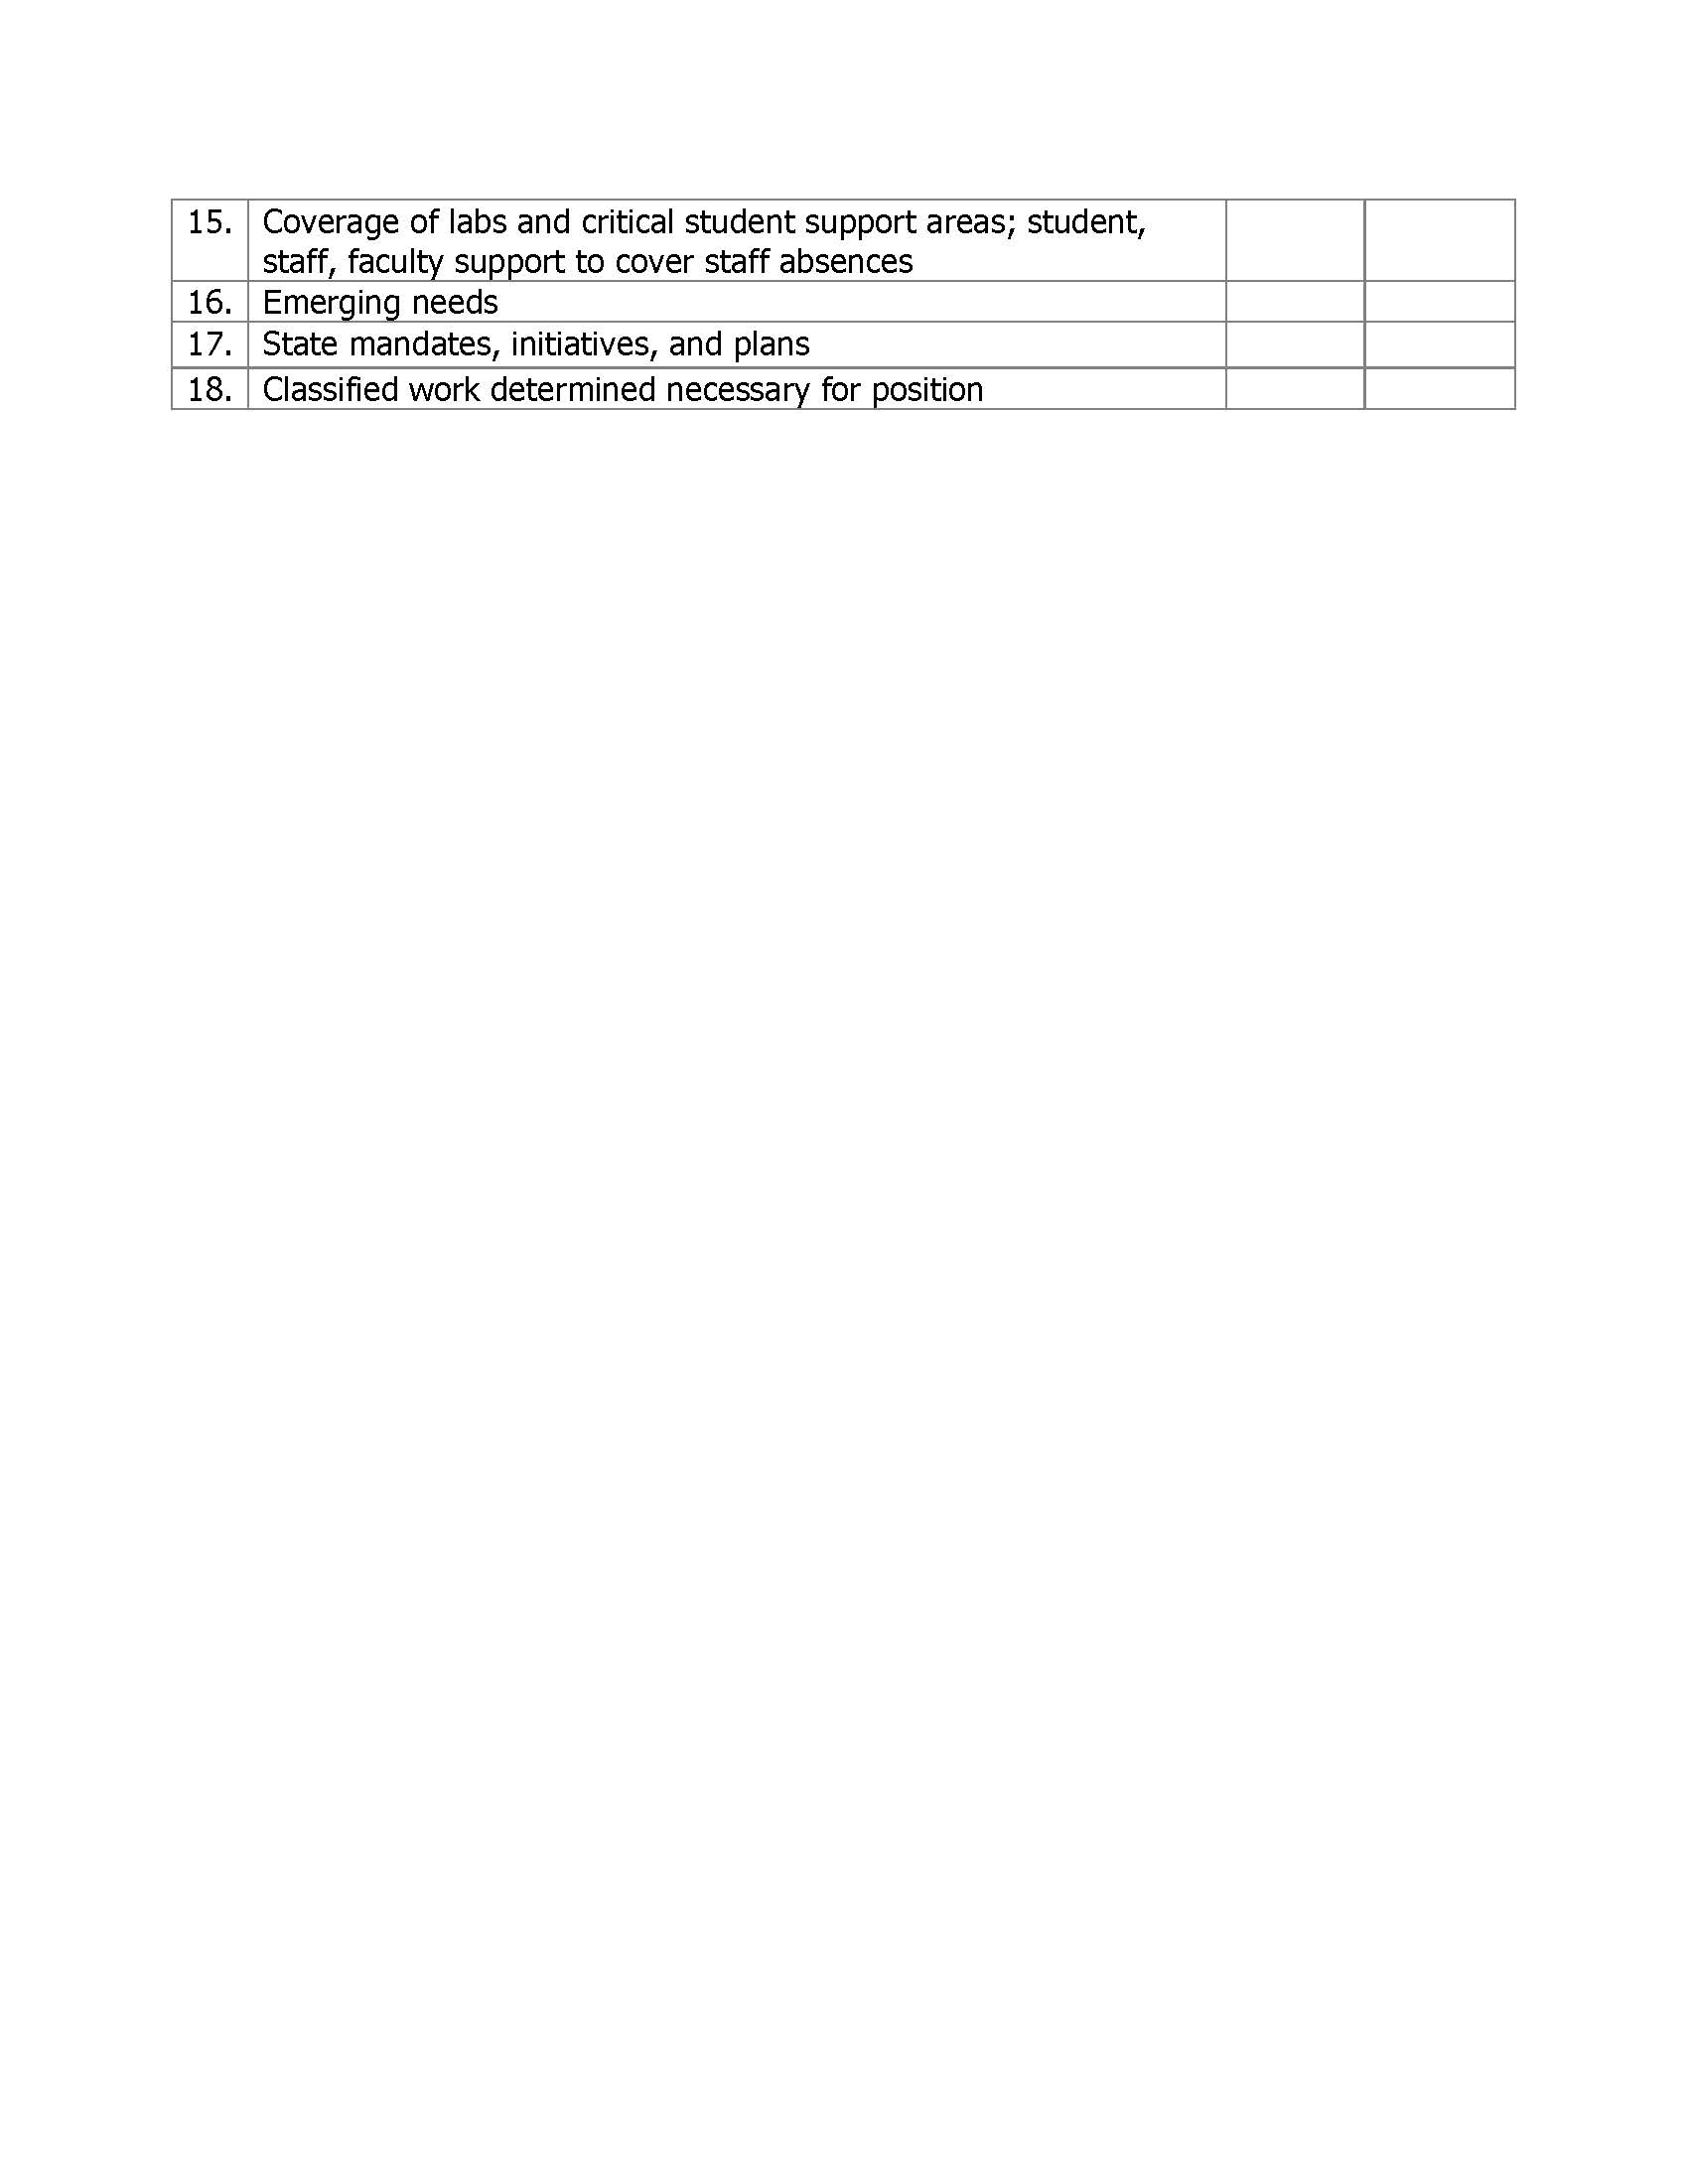 Criteria for Staff Positions page 2